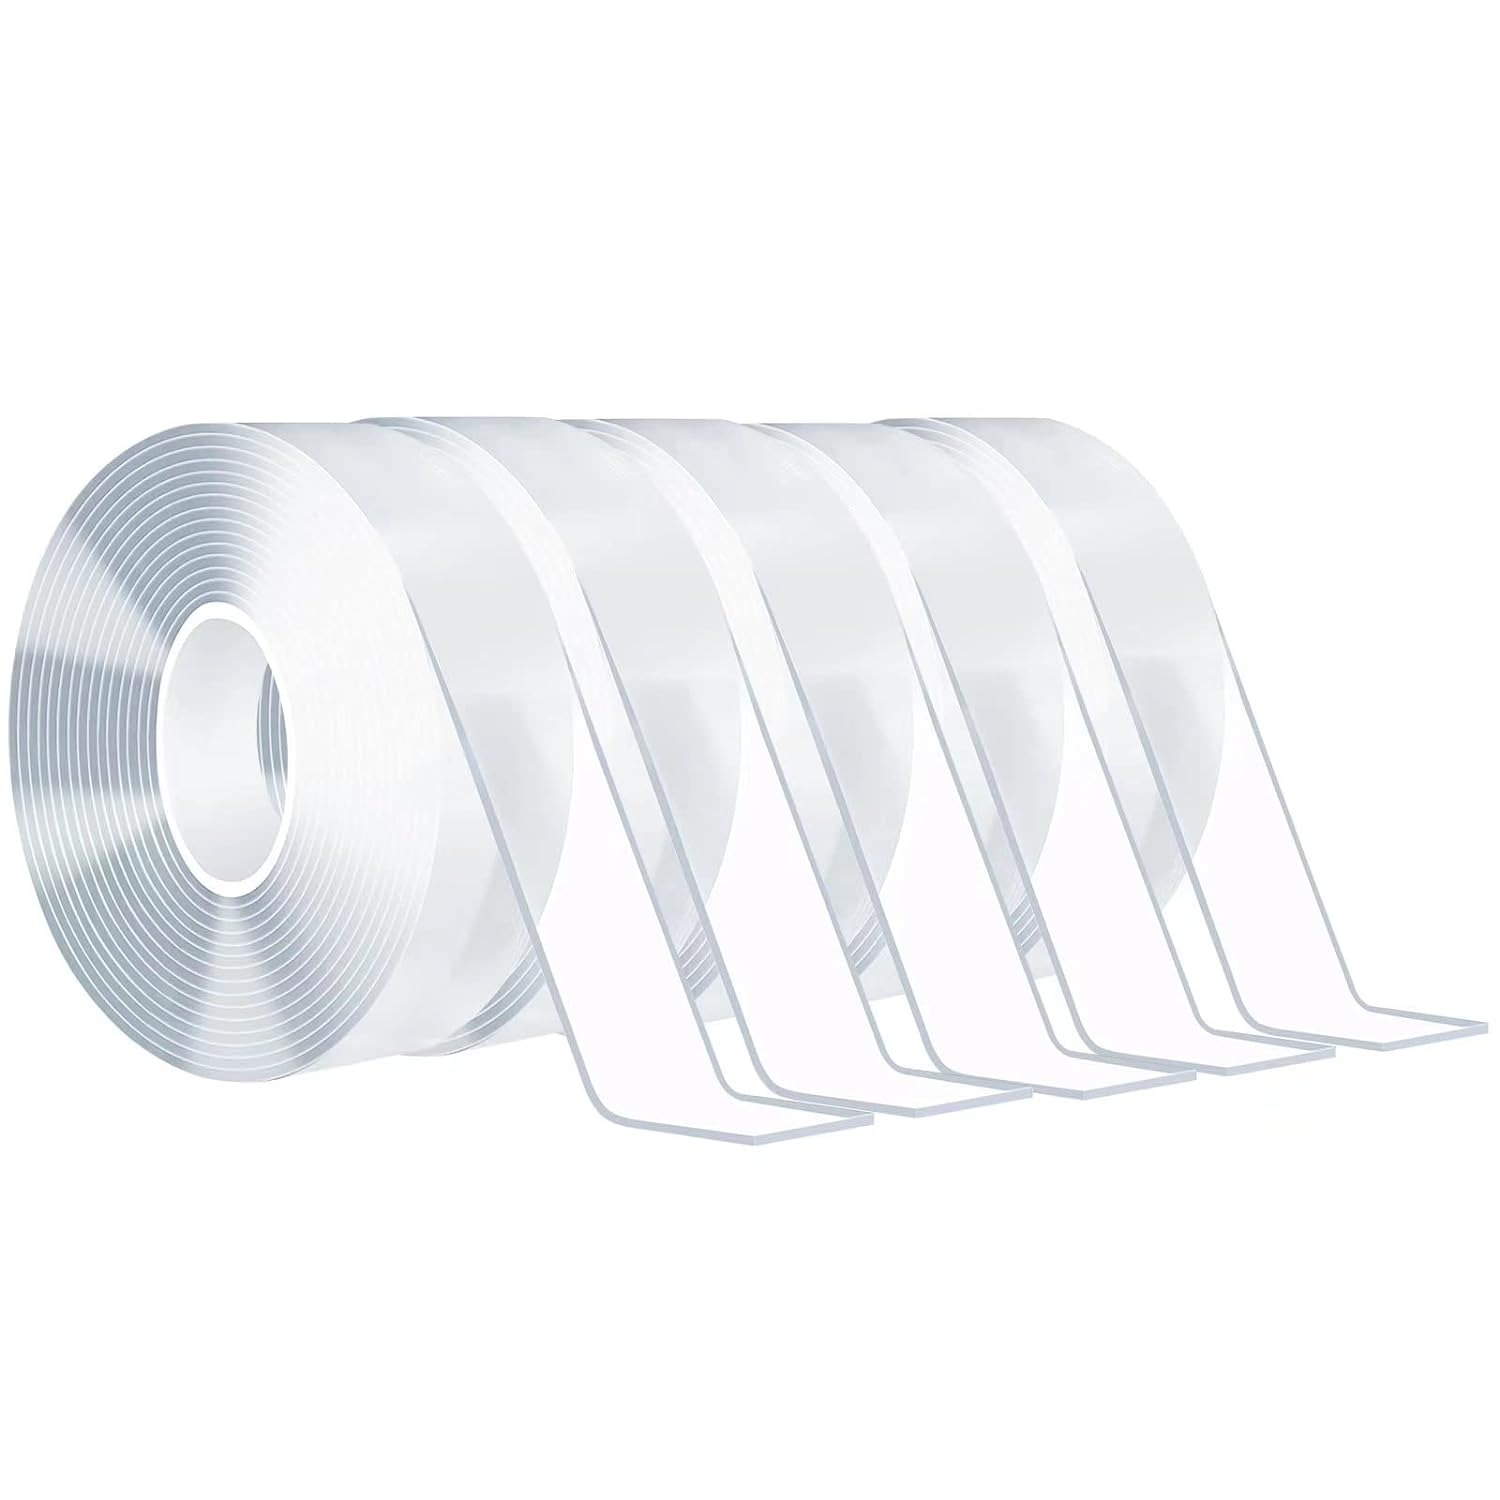 Ohayooz Clear Double Sided Mounting Tape Heavy Duty 30FT, Multipurpose Removable Sticky Extra Strong Adhesive Nano Tape Washable Waterproof for Home Office Outdoor Deco, Pack of 3